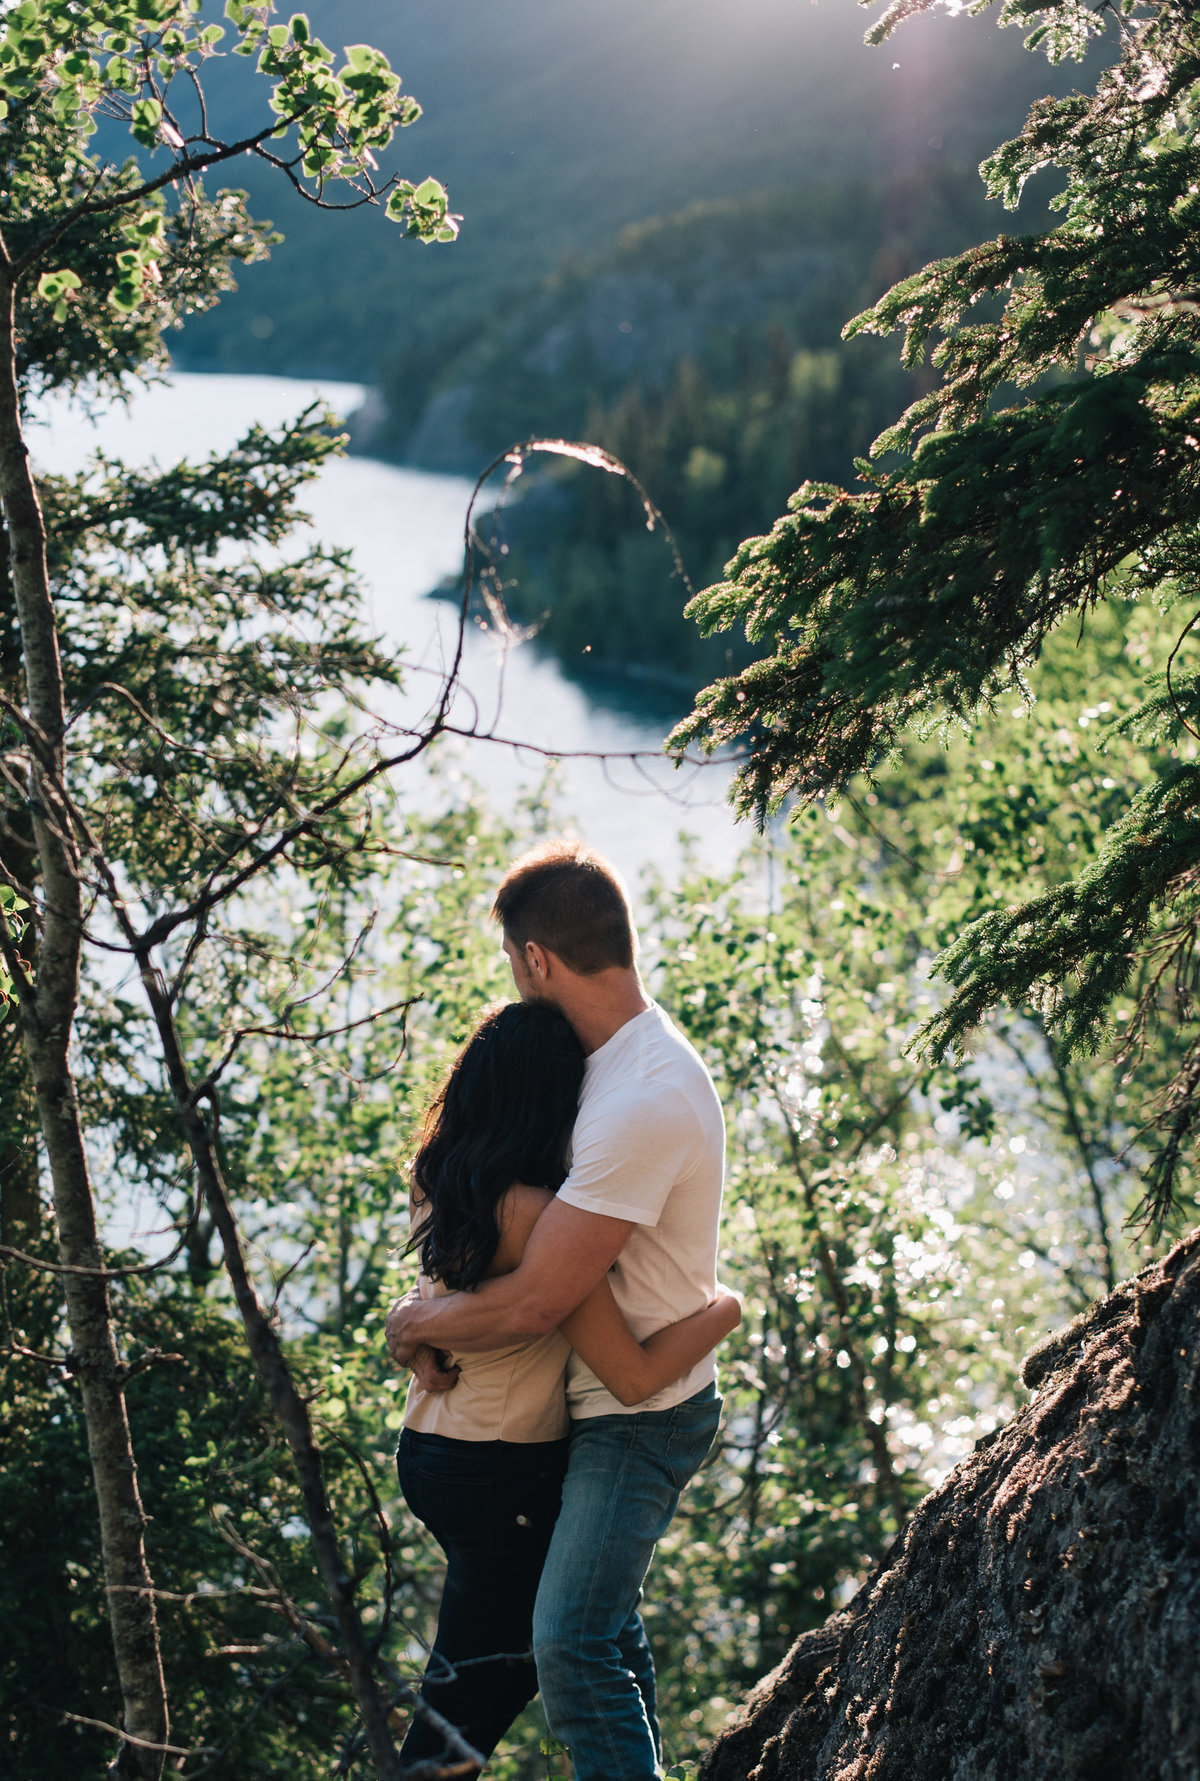 021_Erica Rose Photography_Anchorage Engagement Photographer